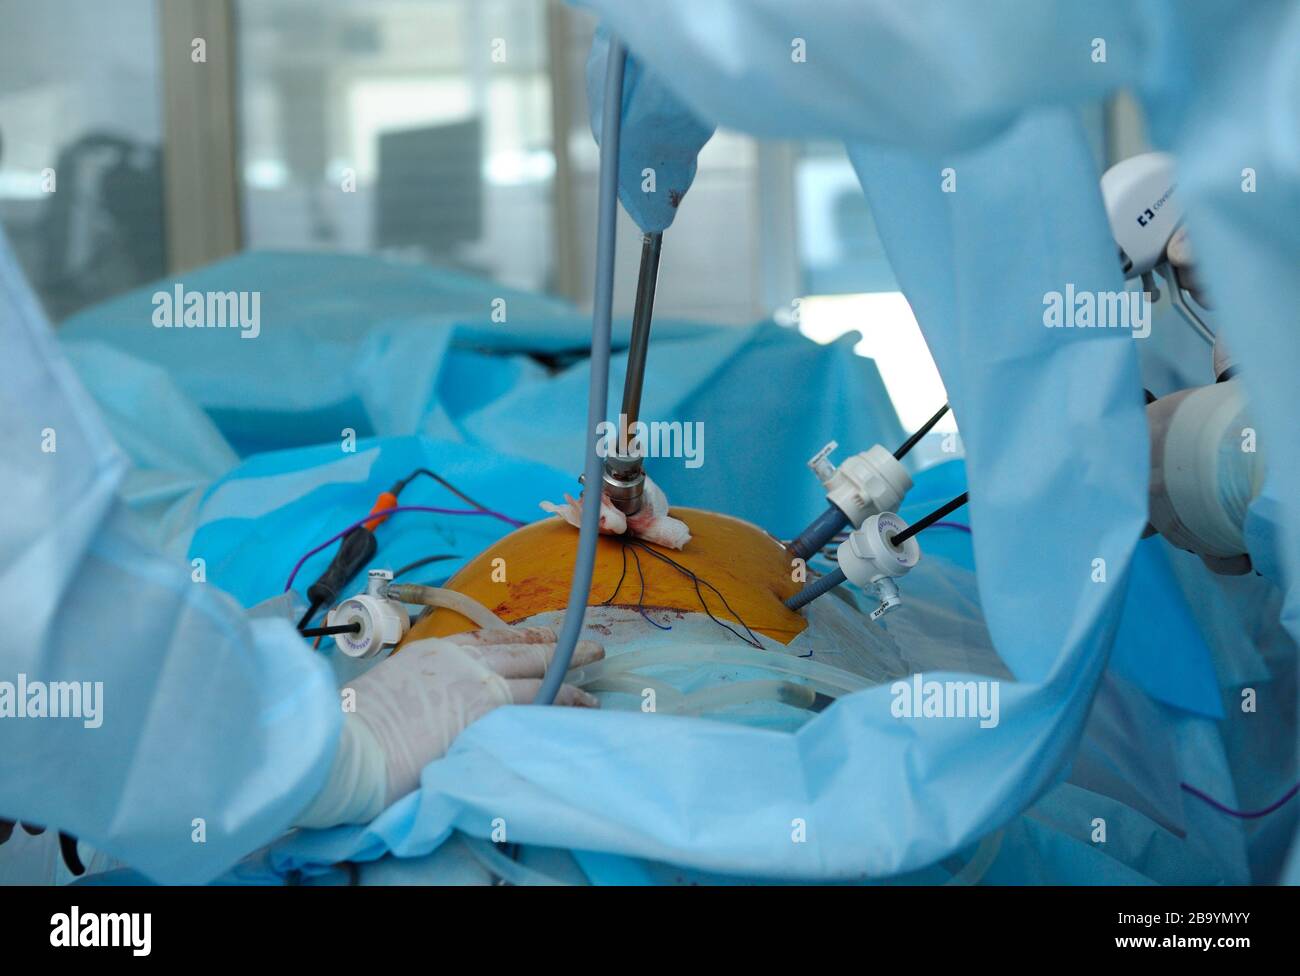 Laparoscopy surgery. Surgeon hand holding laparoscopic instrument attached to a patient belly. Stock Photo